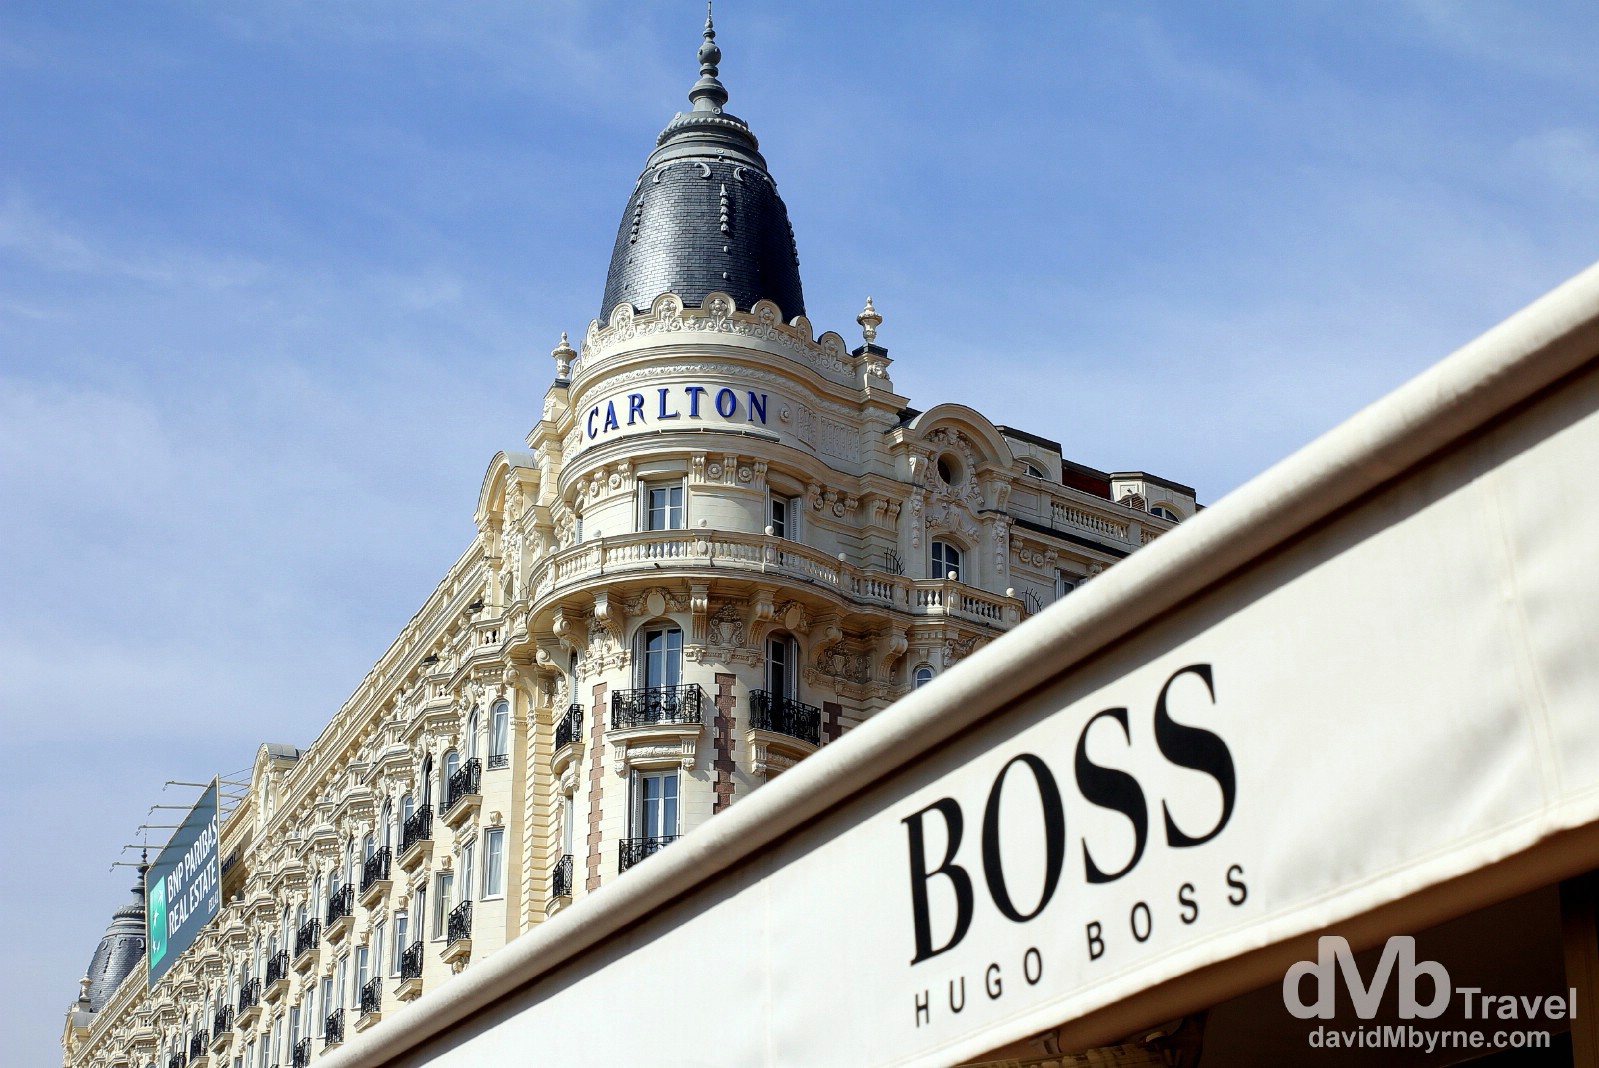 The iconic Carlton Hotel & a Hugo Boss store fronting the waterfront promenade bd de la Croisette in Cannes, Côte d'Azur, France. March 15th, 2014.